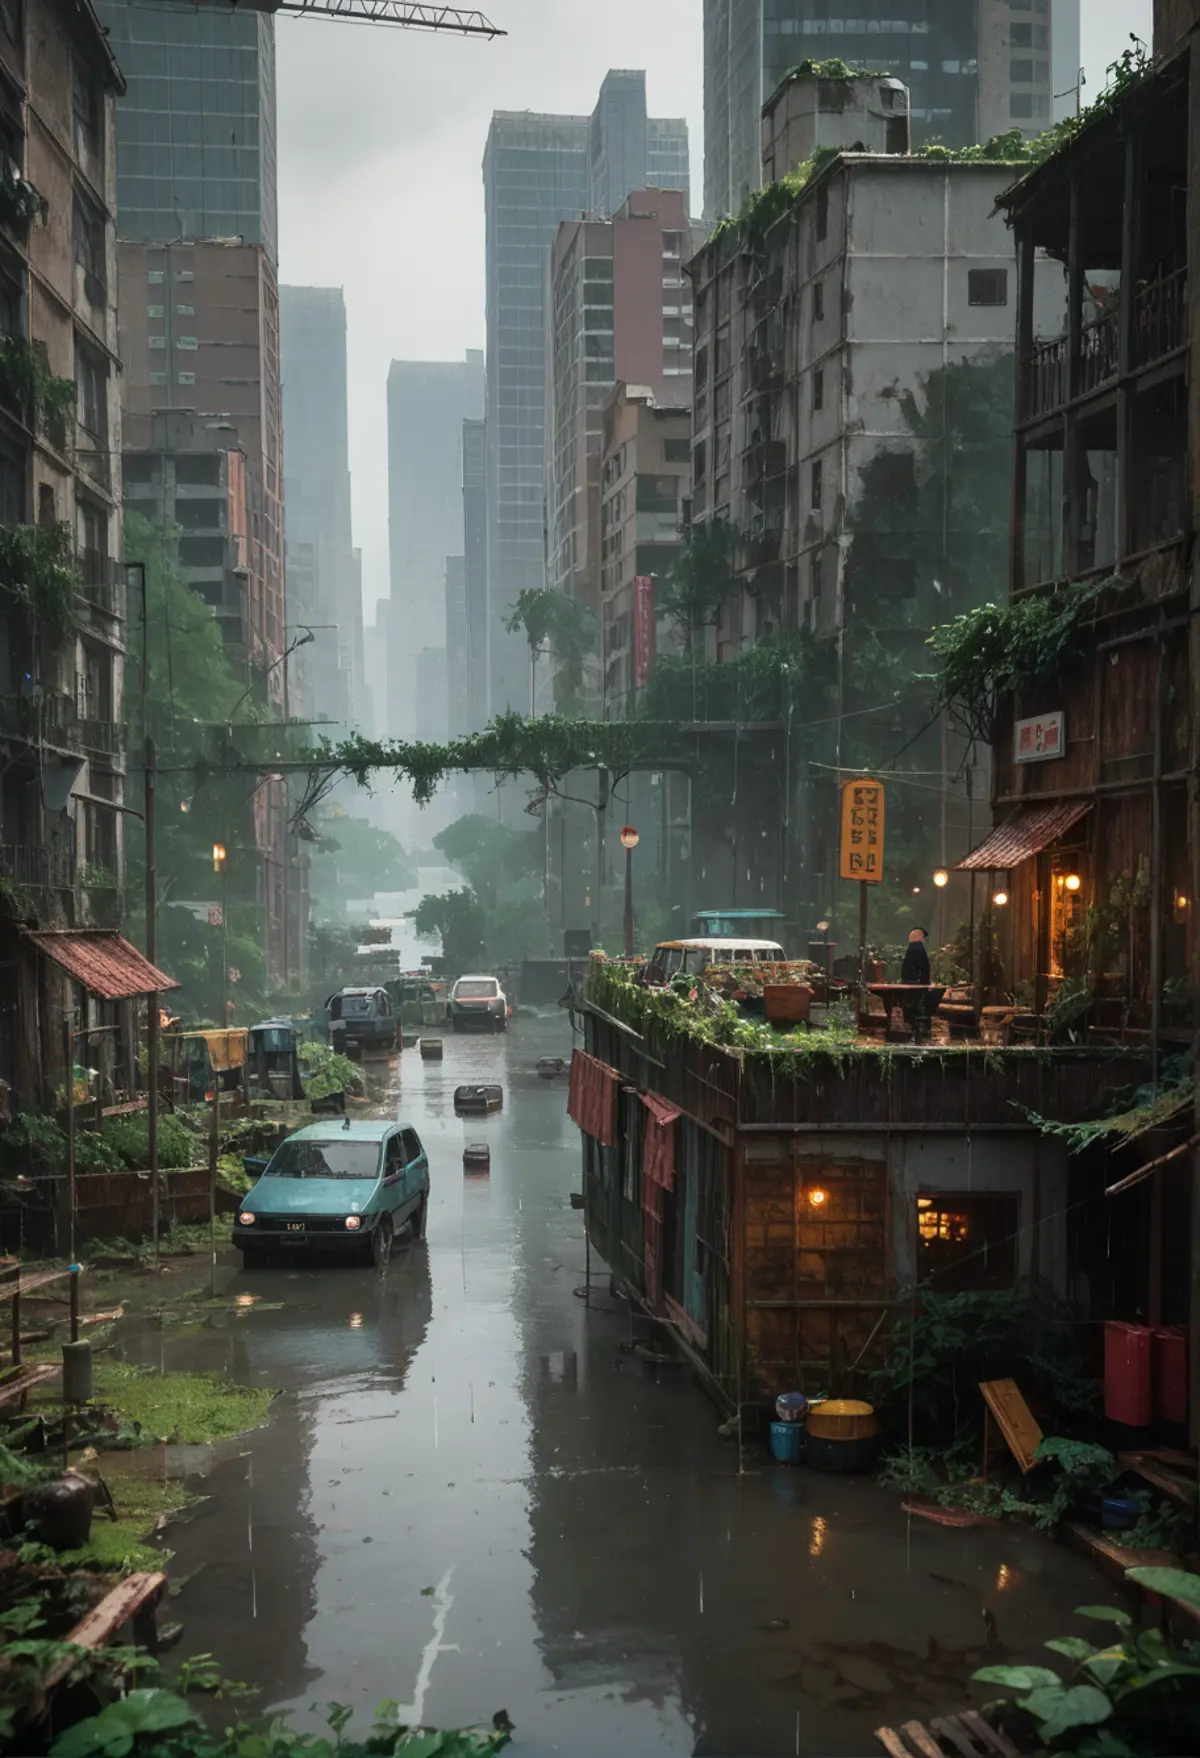 An overgrown, flooded city street, flanked by towering buildings that disappear into the misty sky. The foreground is a striking contrast of urban decay, with verdant plants thriving on the balconies of weathered structures. A car navigates the wet road, its glossy surface mirroring the city. 